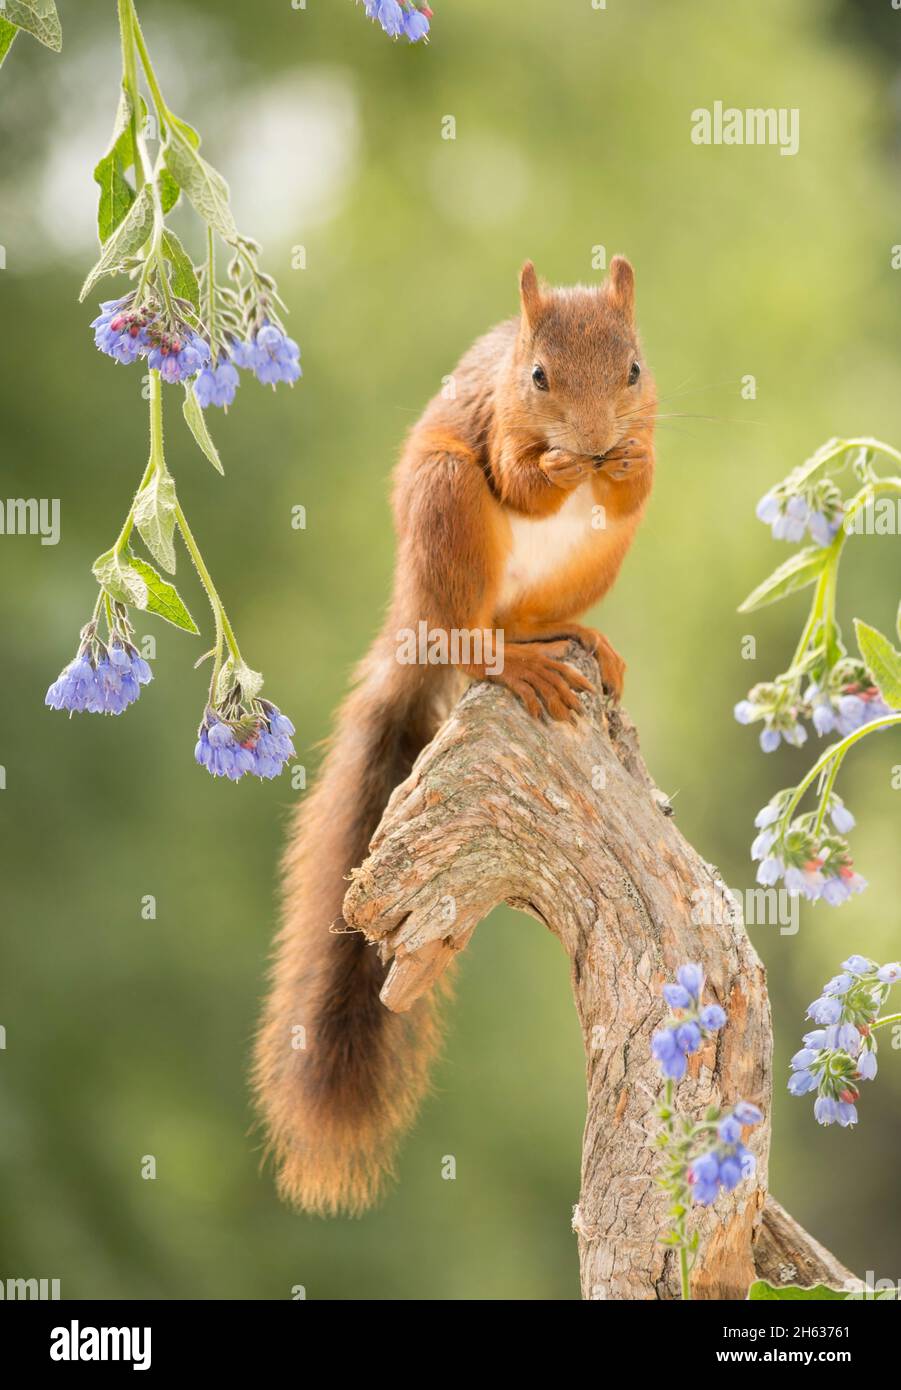 red squirrel standing on a trunk with blue flowers Stock Photo